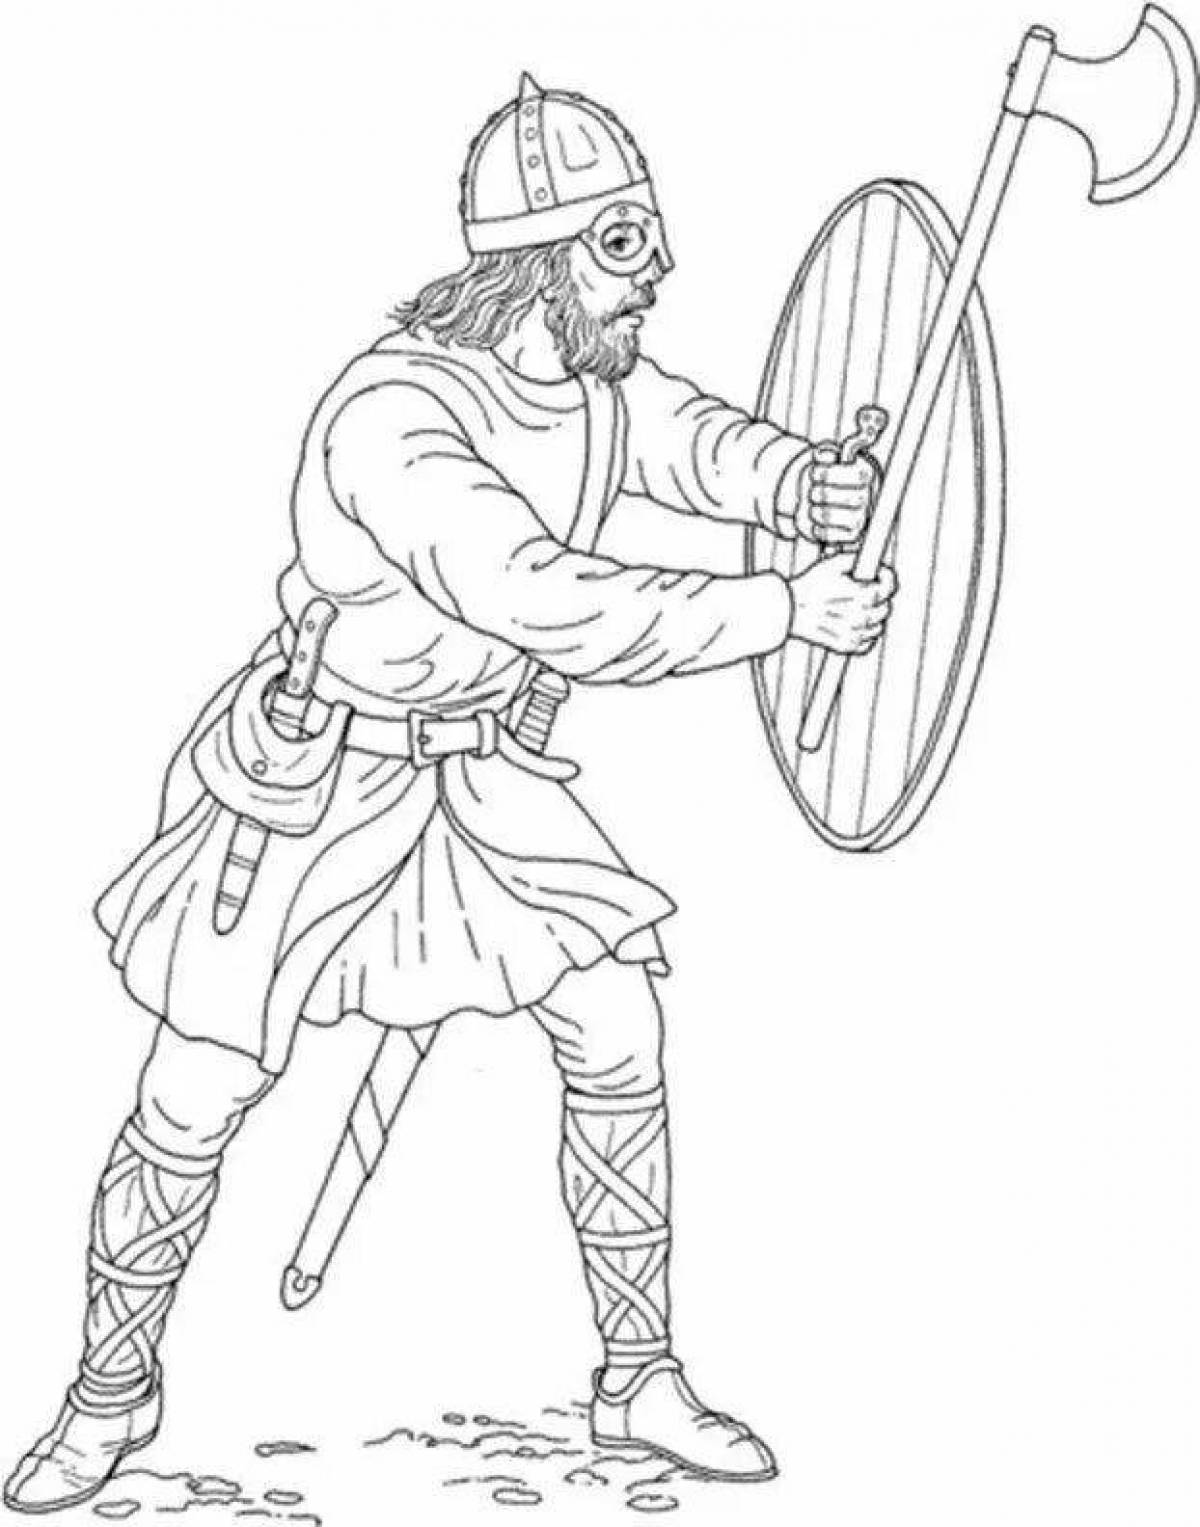 Saucy Viking coloring page